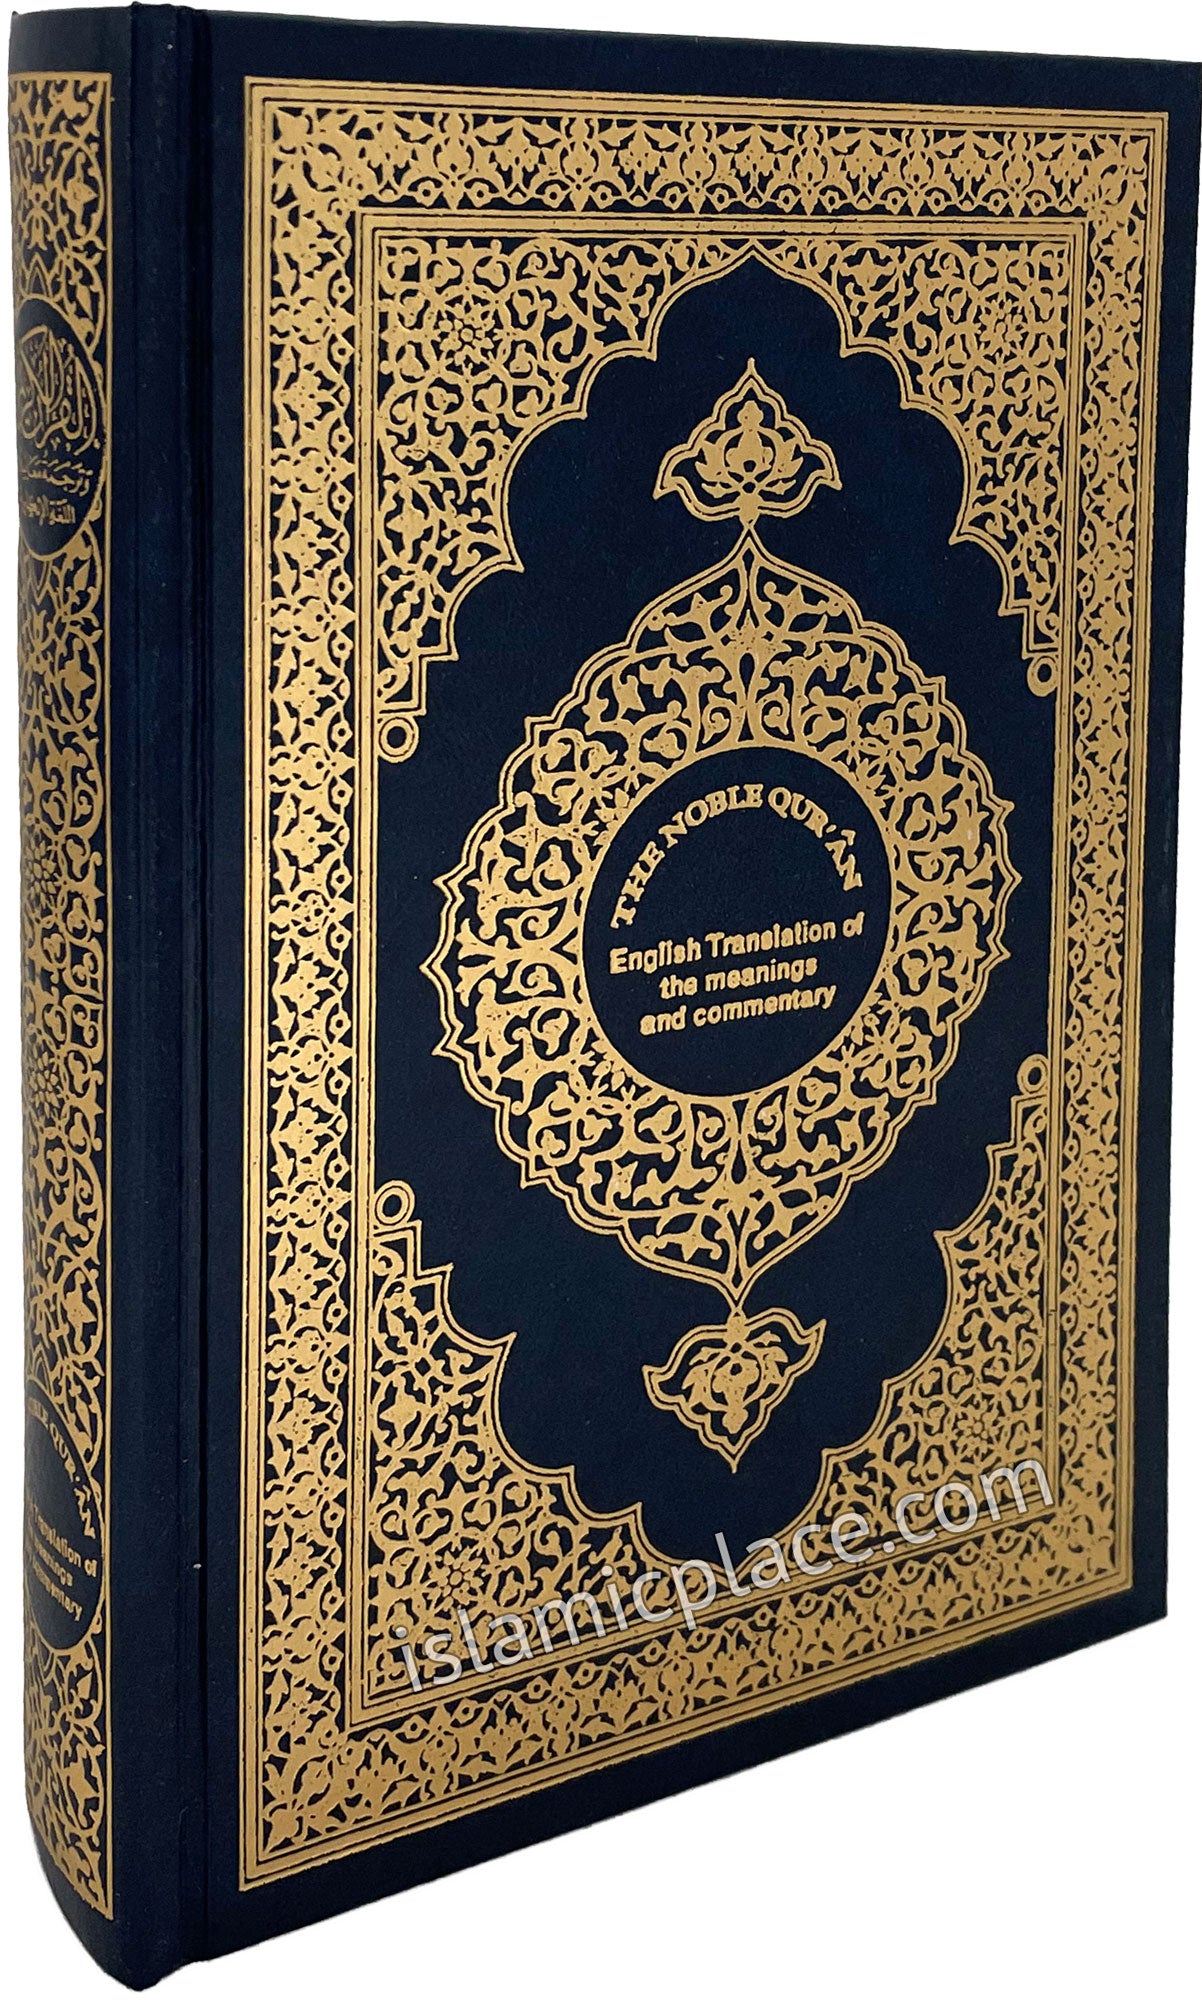 The Noble Quran, English Translation of the meanings and commentary - Large 6" x 9" Hardback